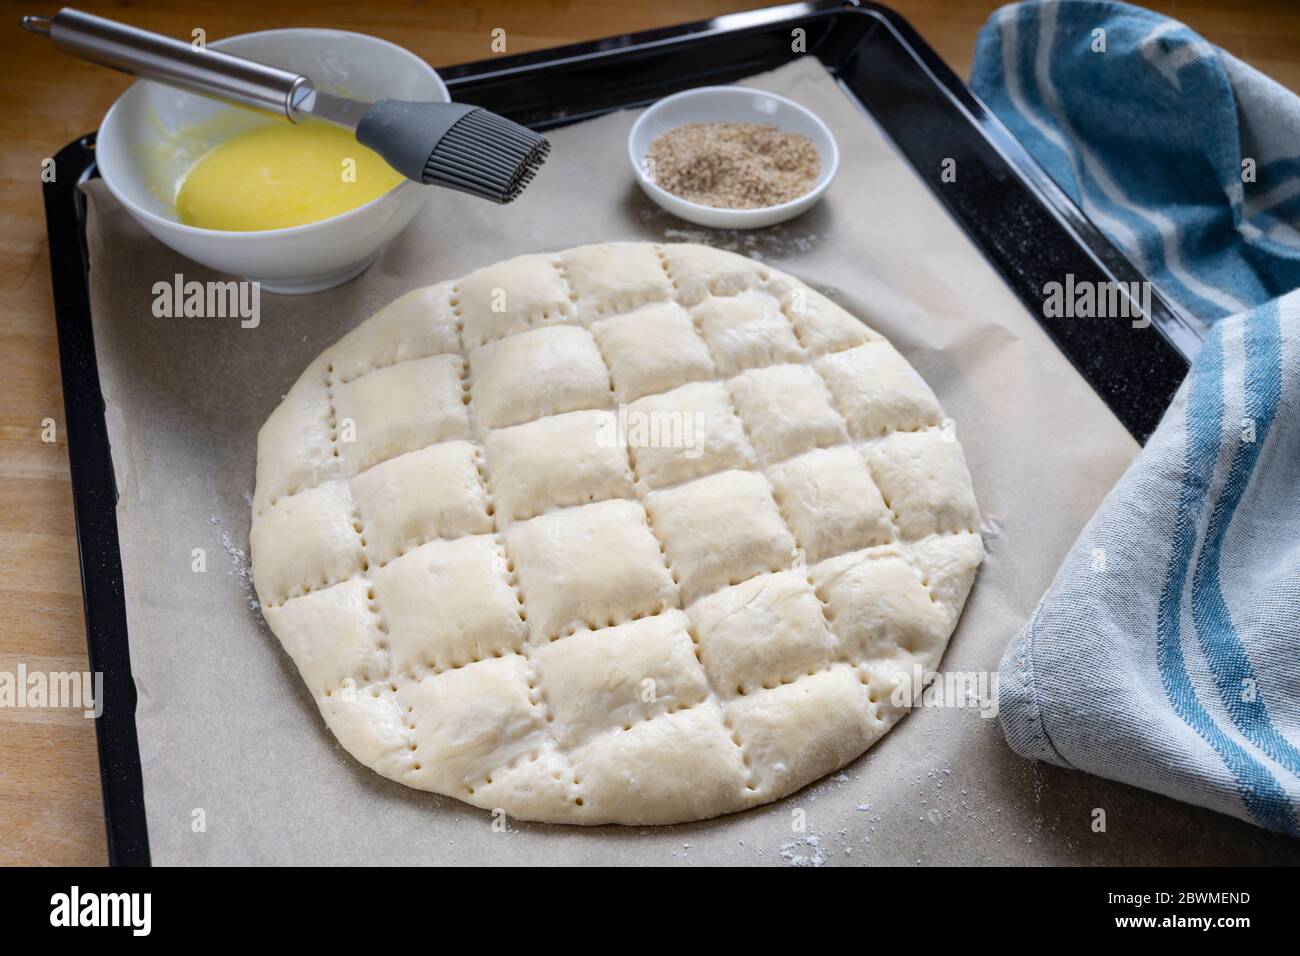 Flat bread dough with the typical pattern for Turkish Ramadan pide on a baking tray with paper, egg yolk for coating and sesame seed, selected focus, Stock Photo